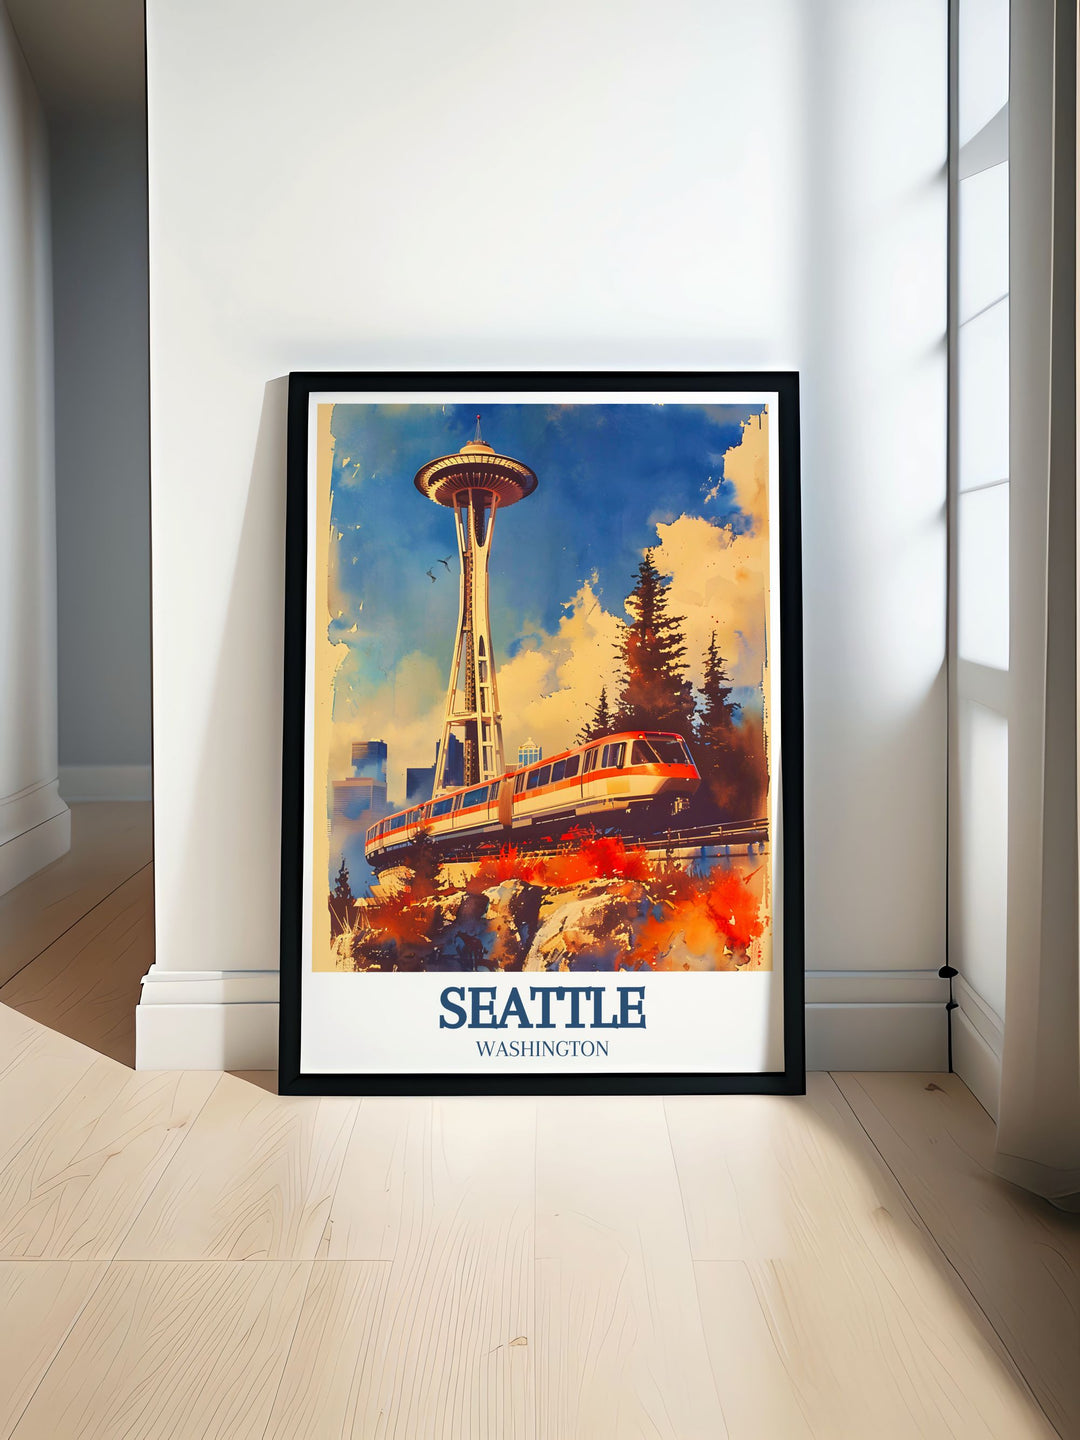 Featuring the serene landscapes of the Summit at Snoqualmie and the architectural marvels of the Seattle skyline, this skiing poster is perfect for those who love winter sports and appreciate the beauty of iconic landmarks.